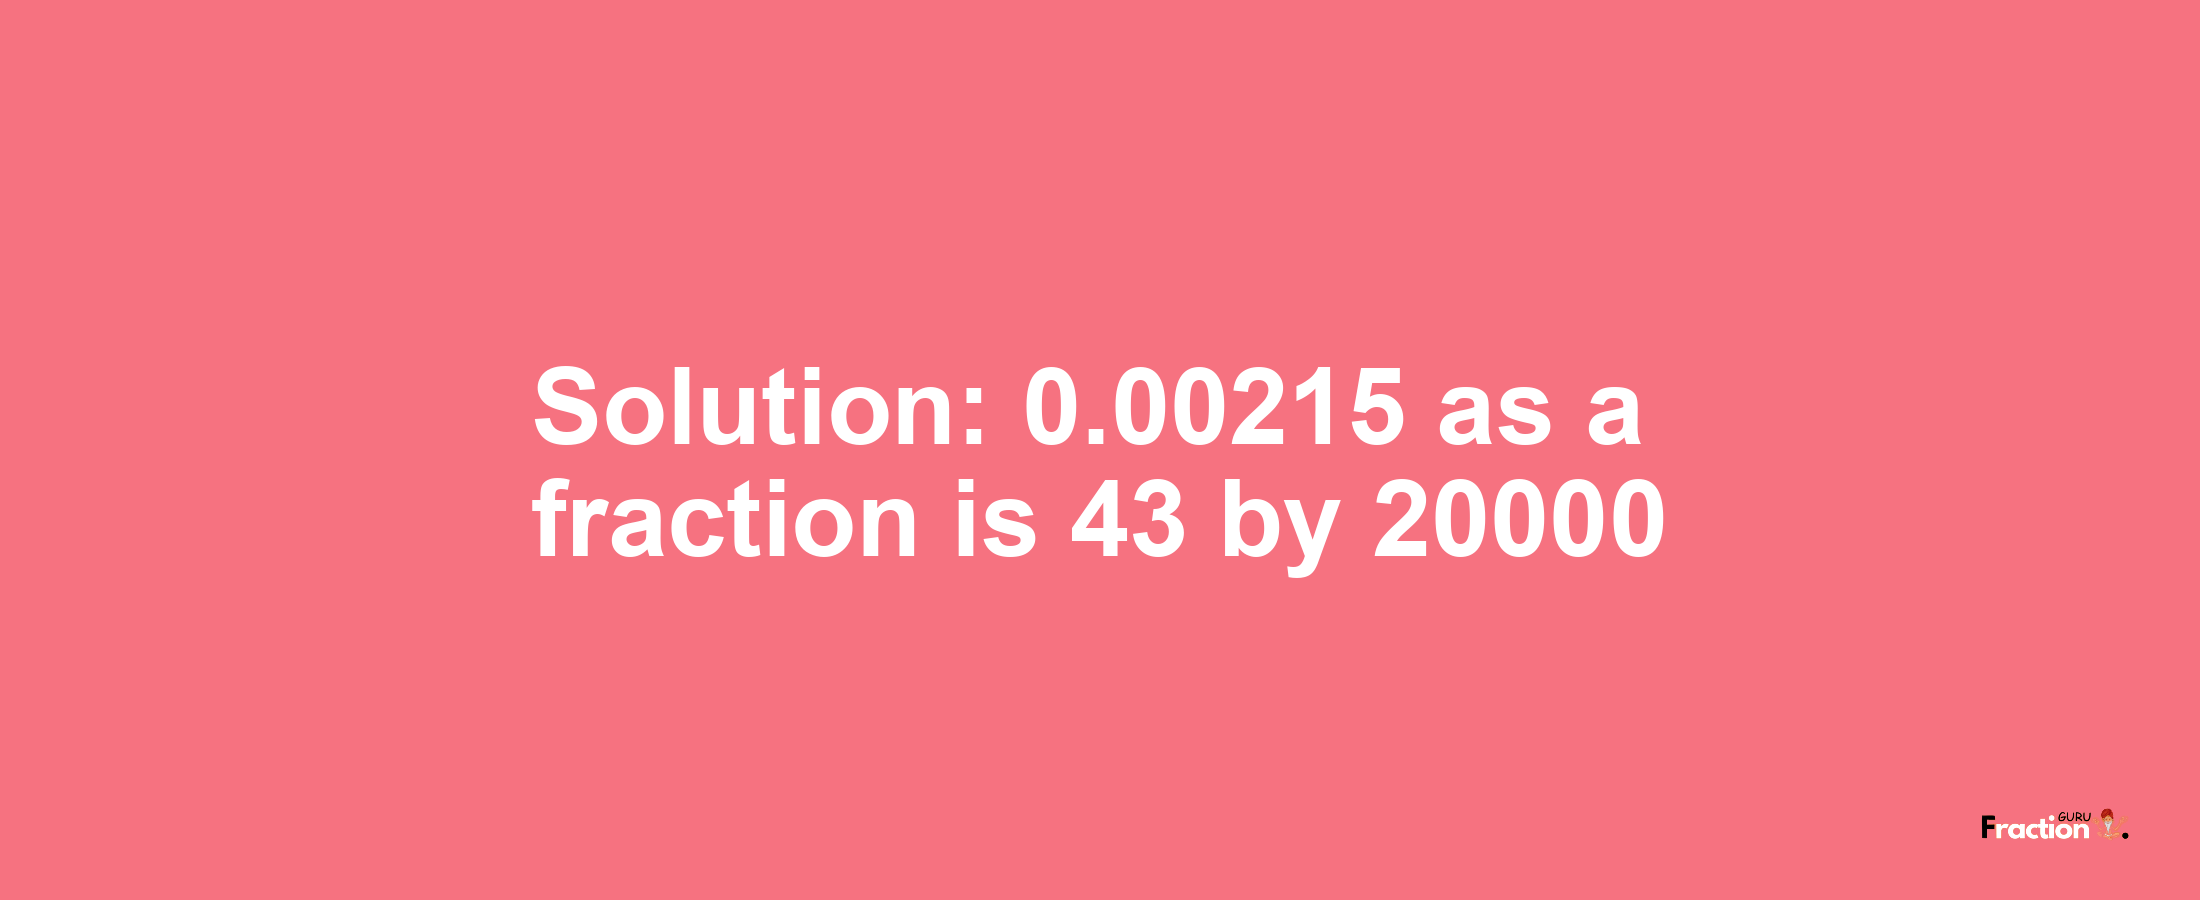 Solution:0.00215 as a fraction is 43/20000